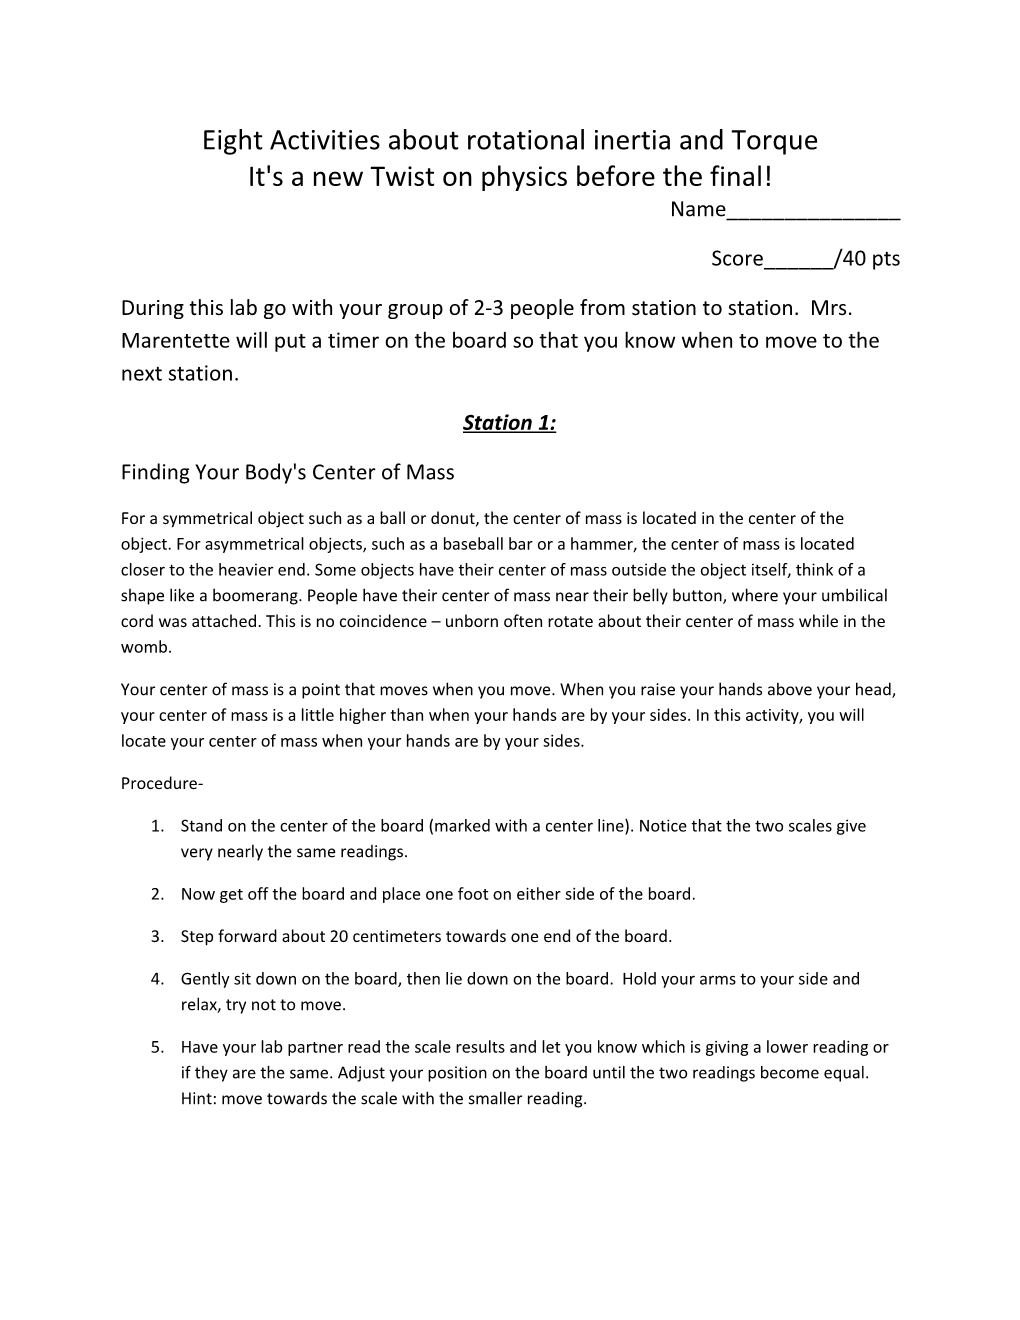 Eight Activities About Rotational Inertia and Torque